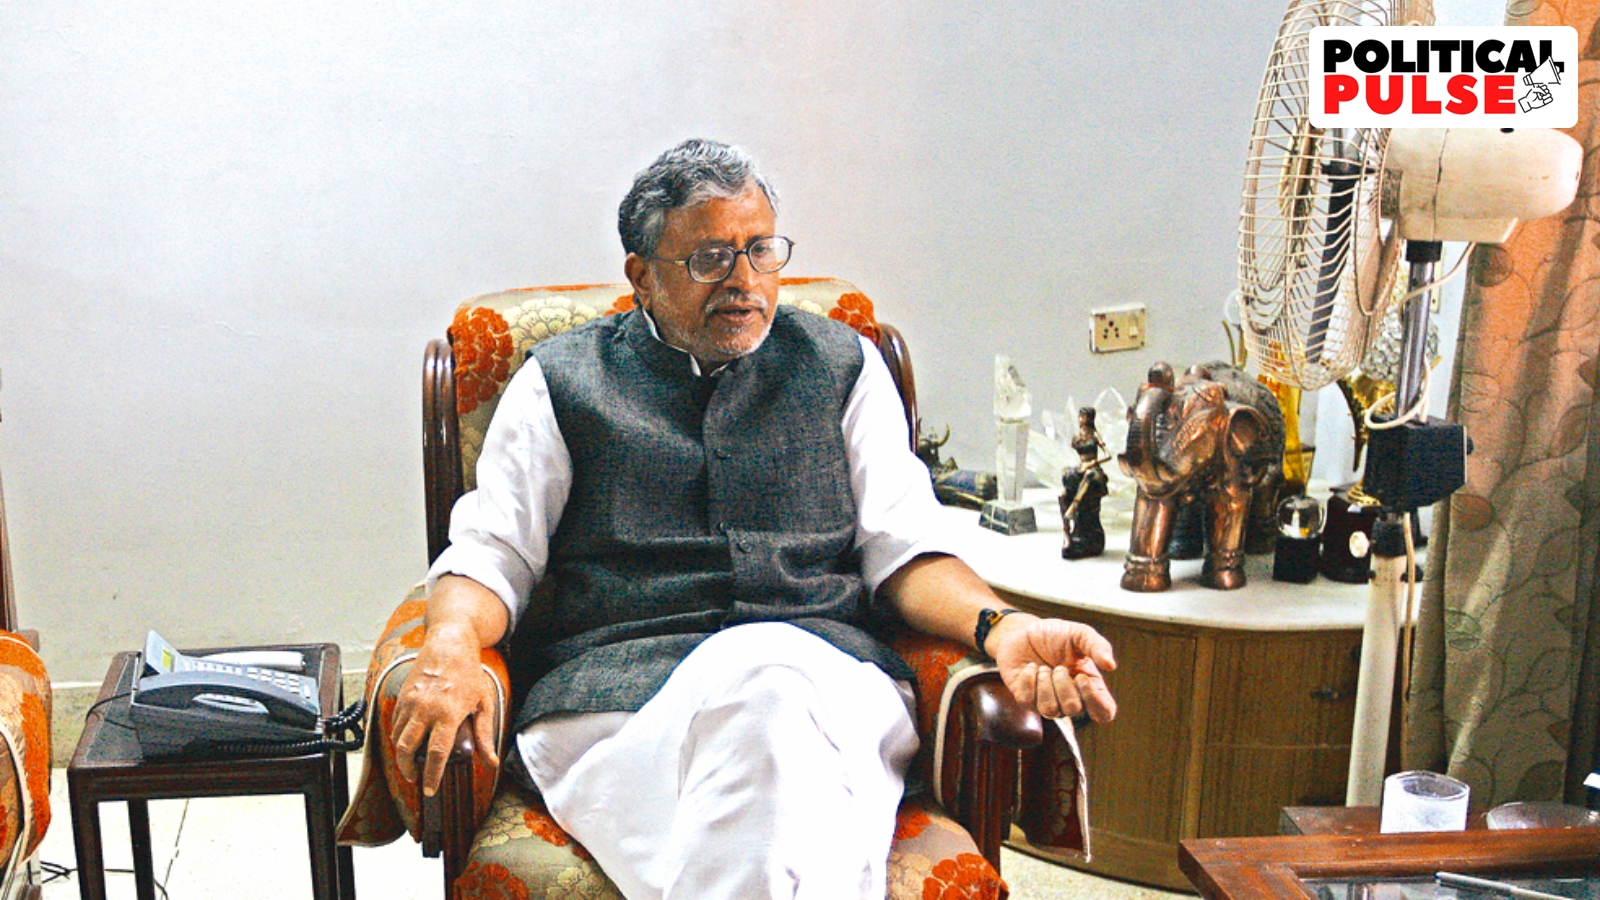 Sushil Kumar Modi: The man behind BJP's rise in Bihar, was shaped by JP movement - The Indian Express